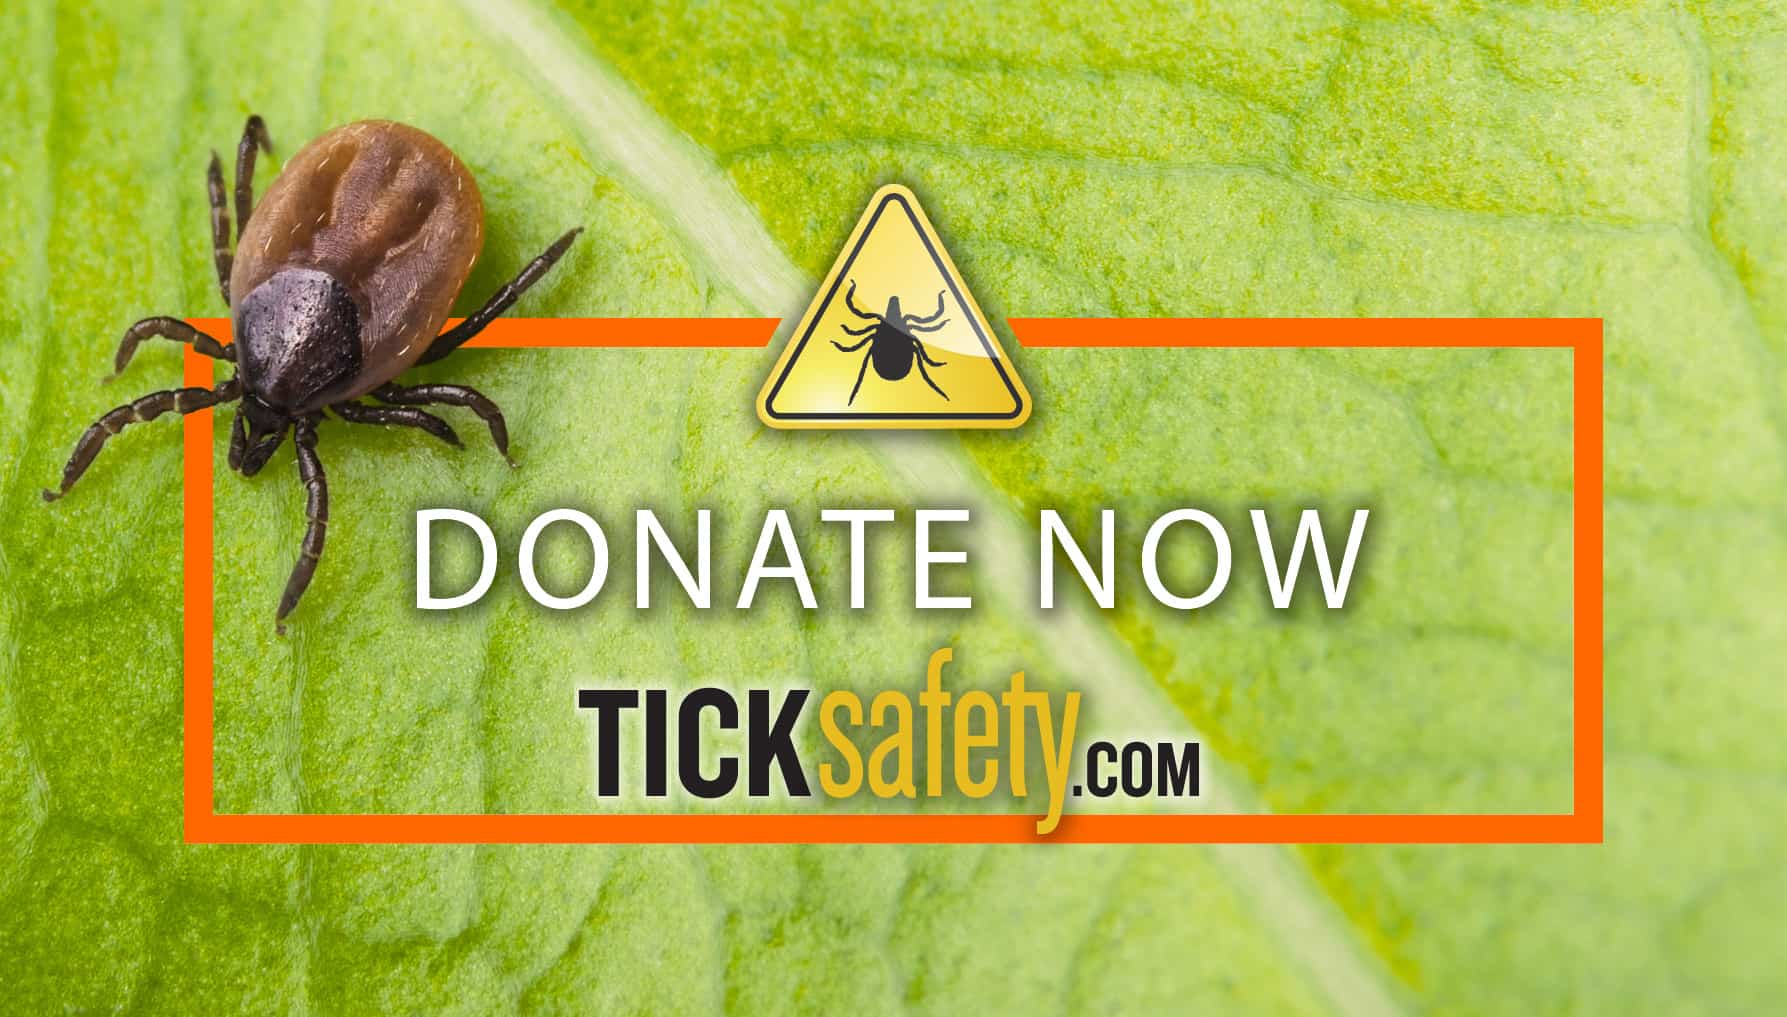 Donate Now - Tick Safety Education is Important!